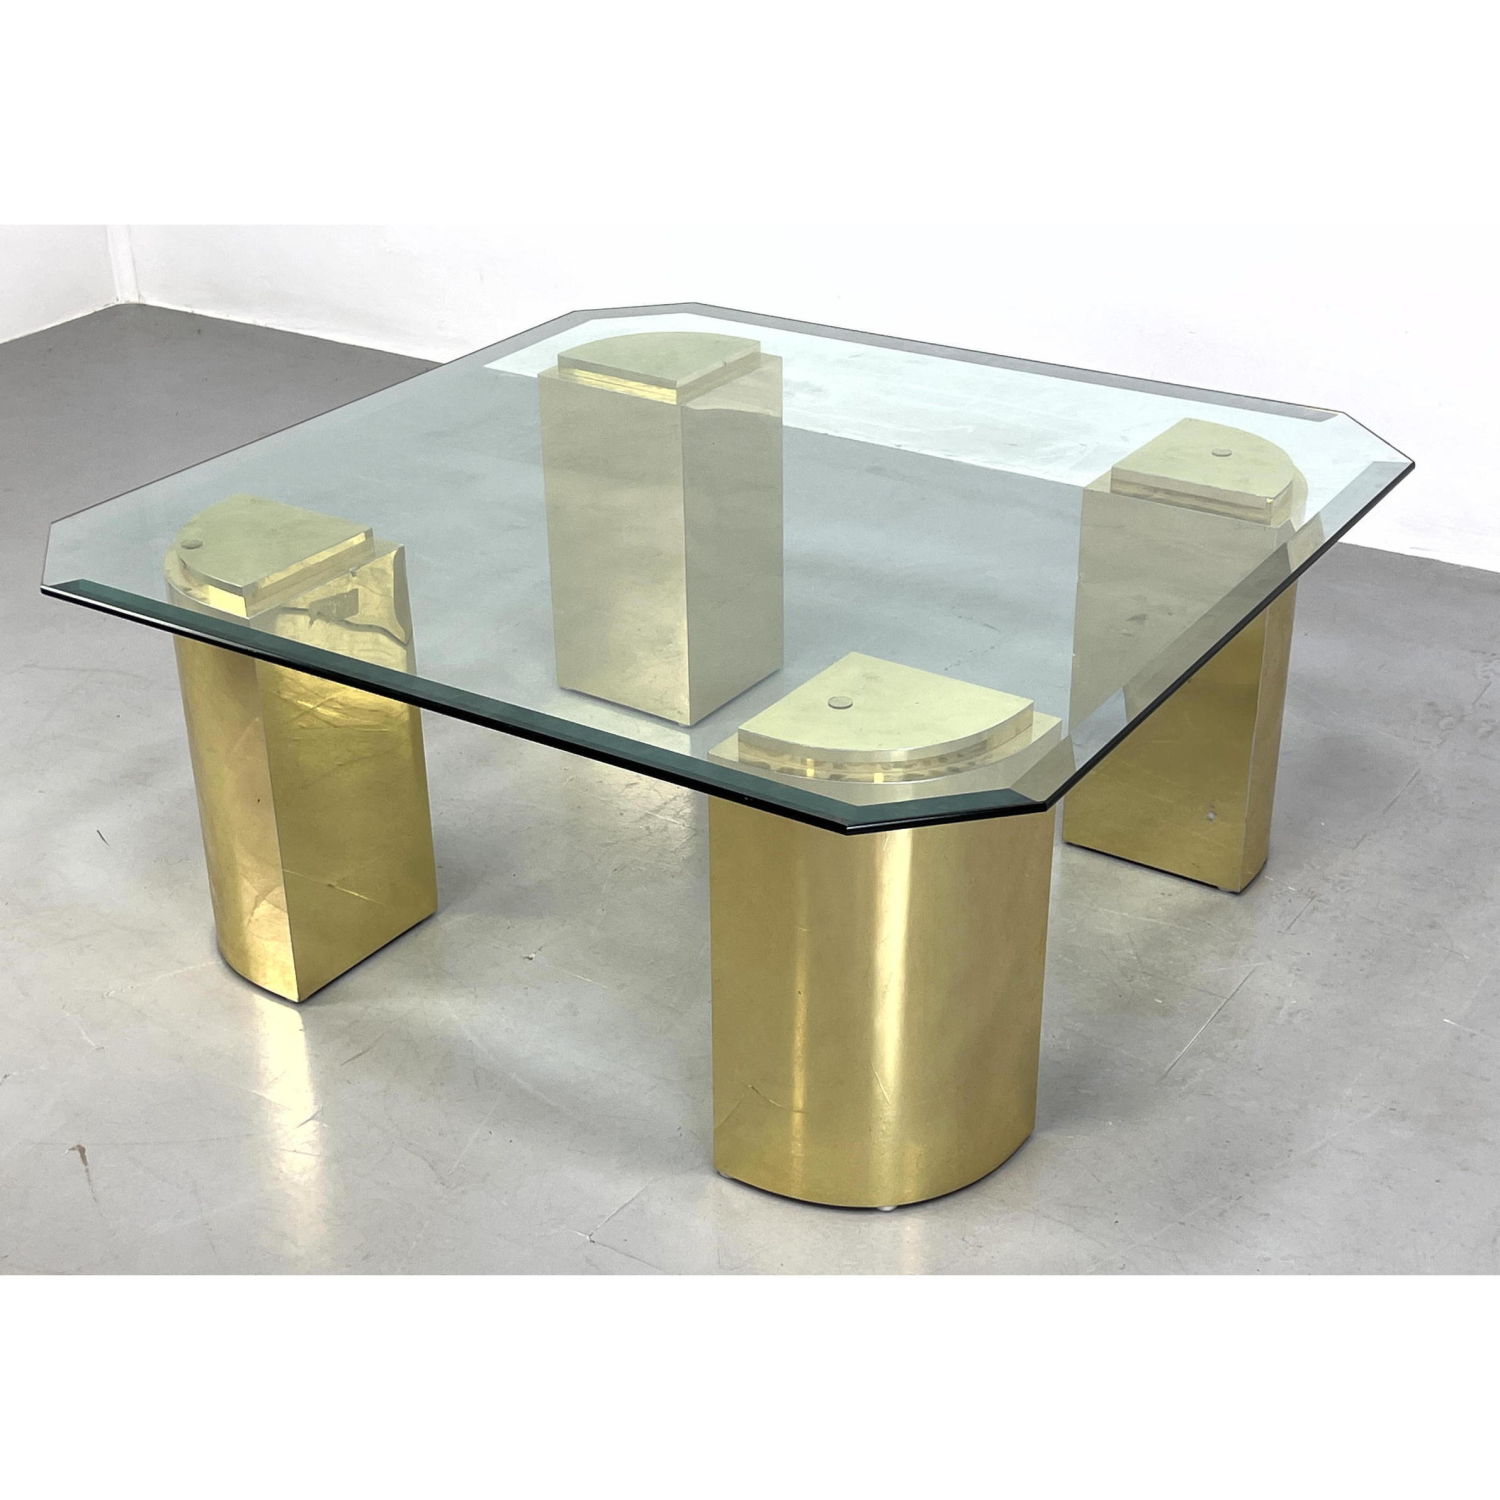 Springer style Coffee Table. laminate